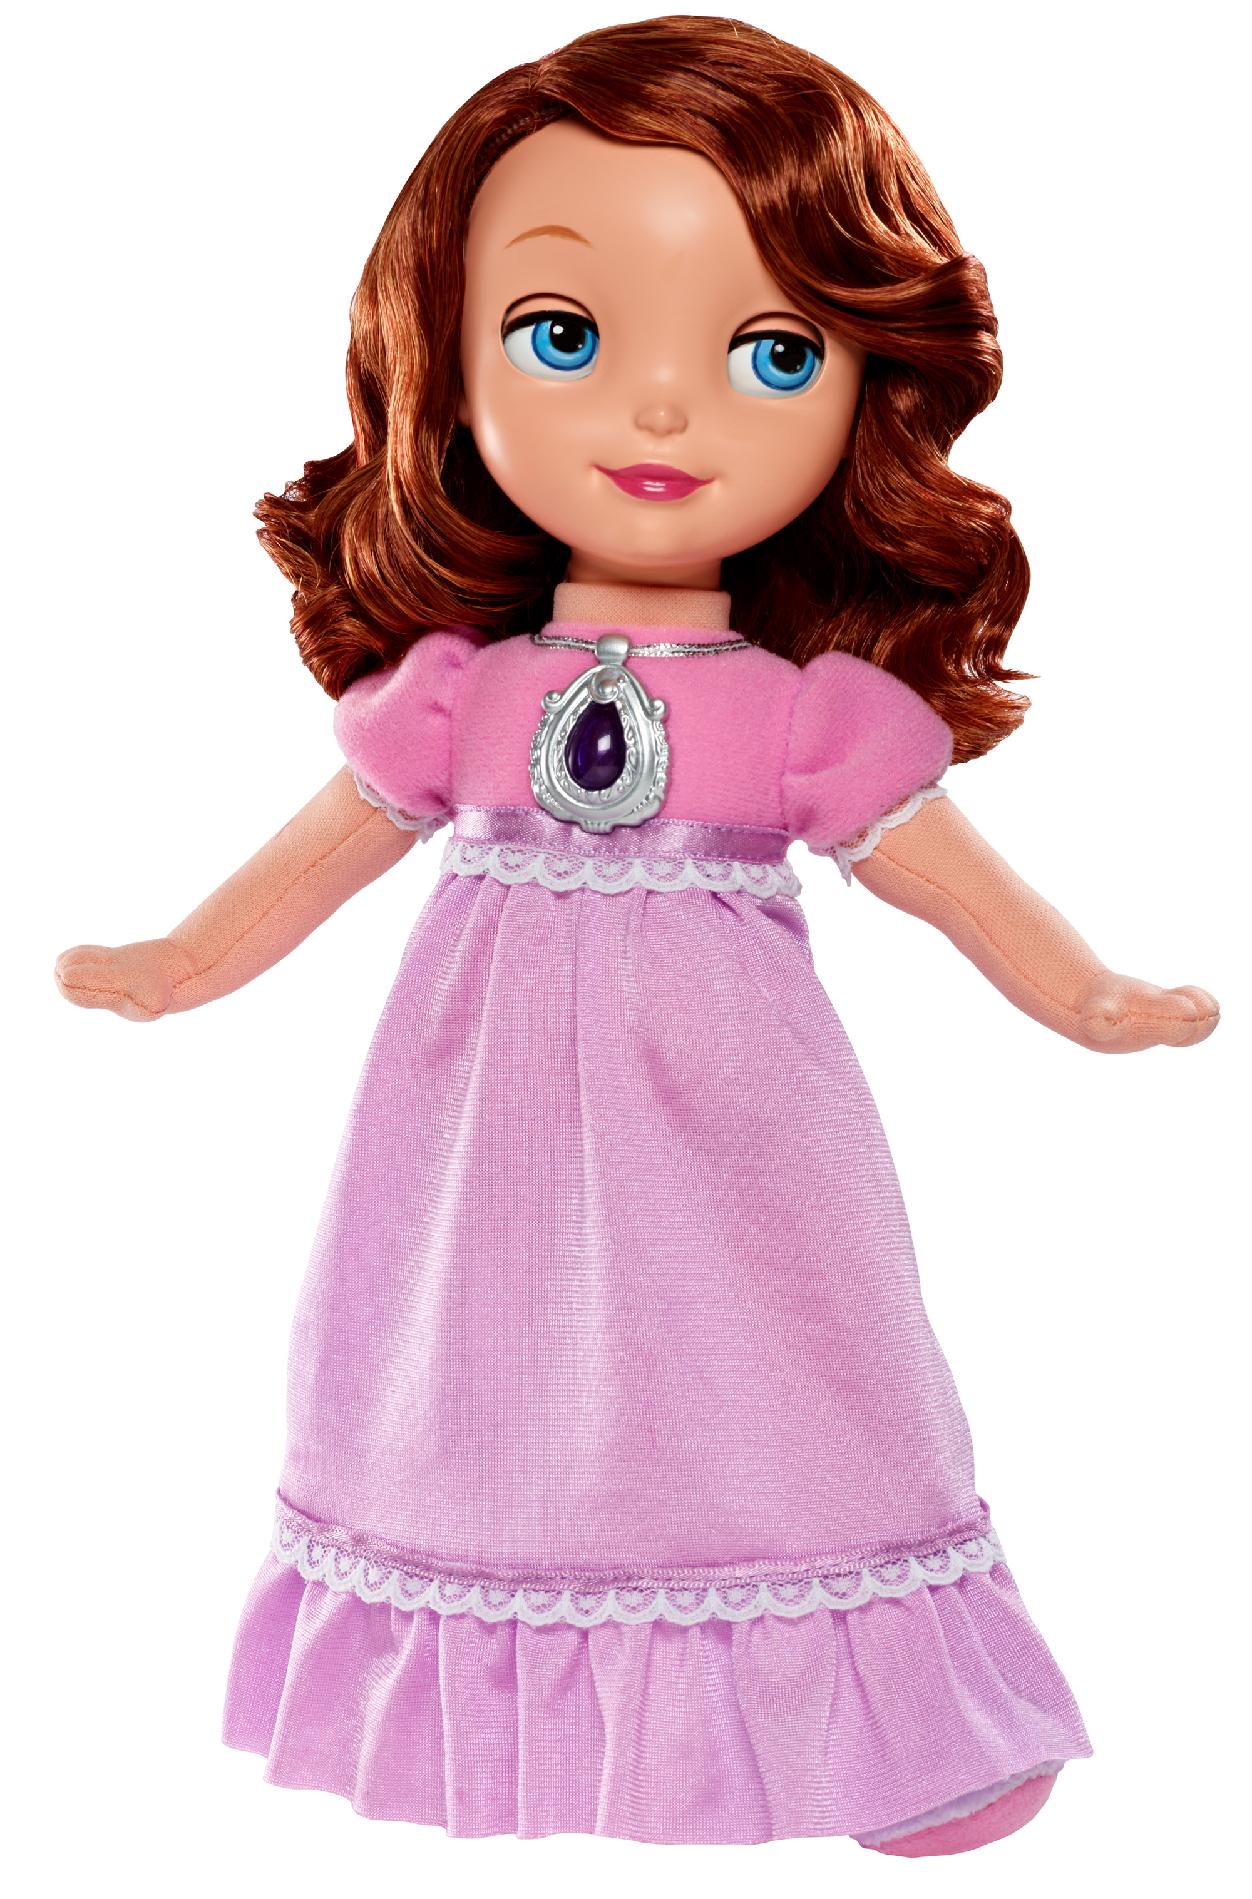 Disney Sofia the First Bedtime Doll $17.99 Today Only!